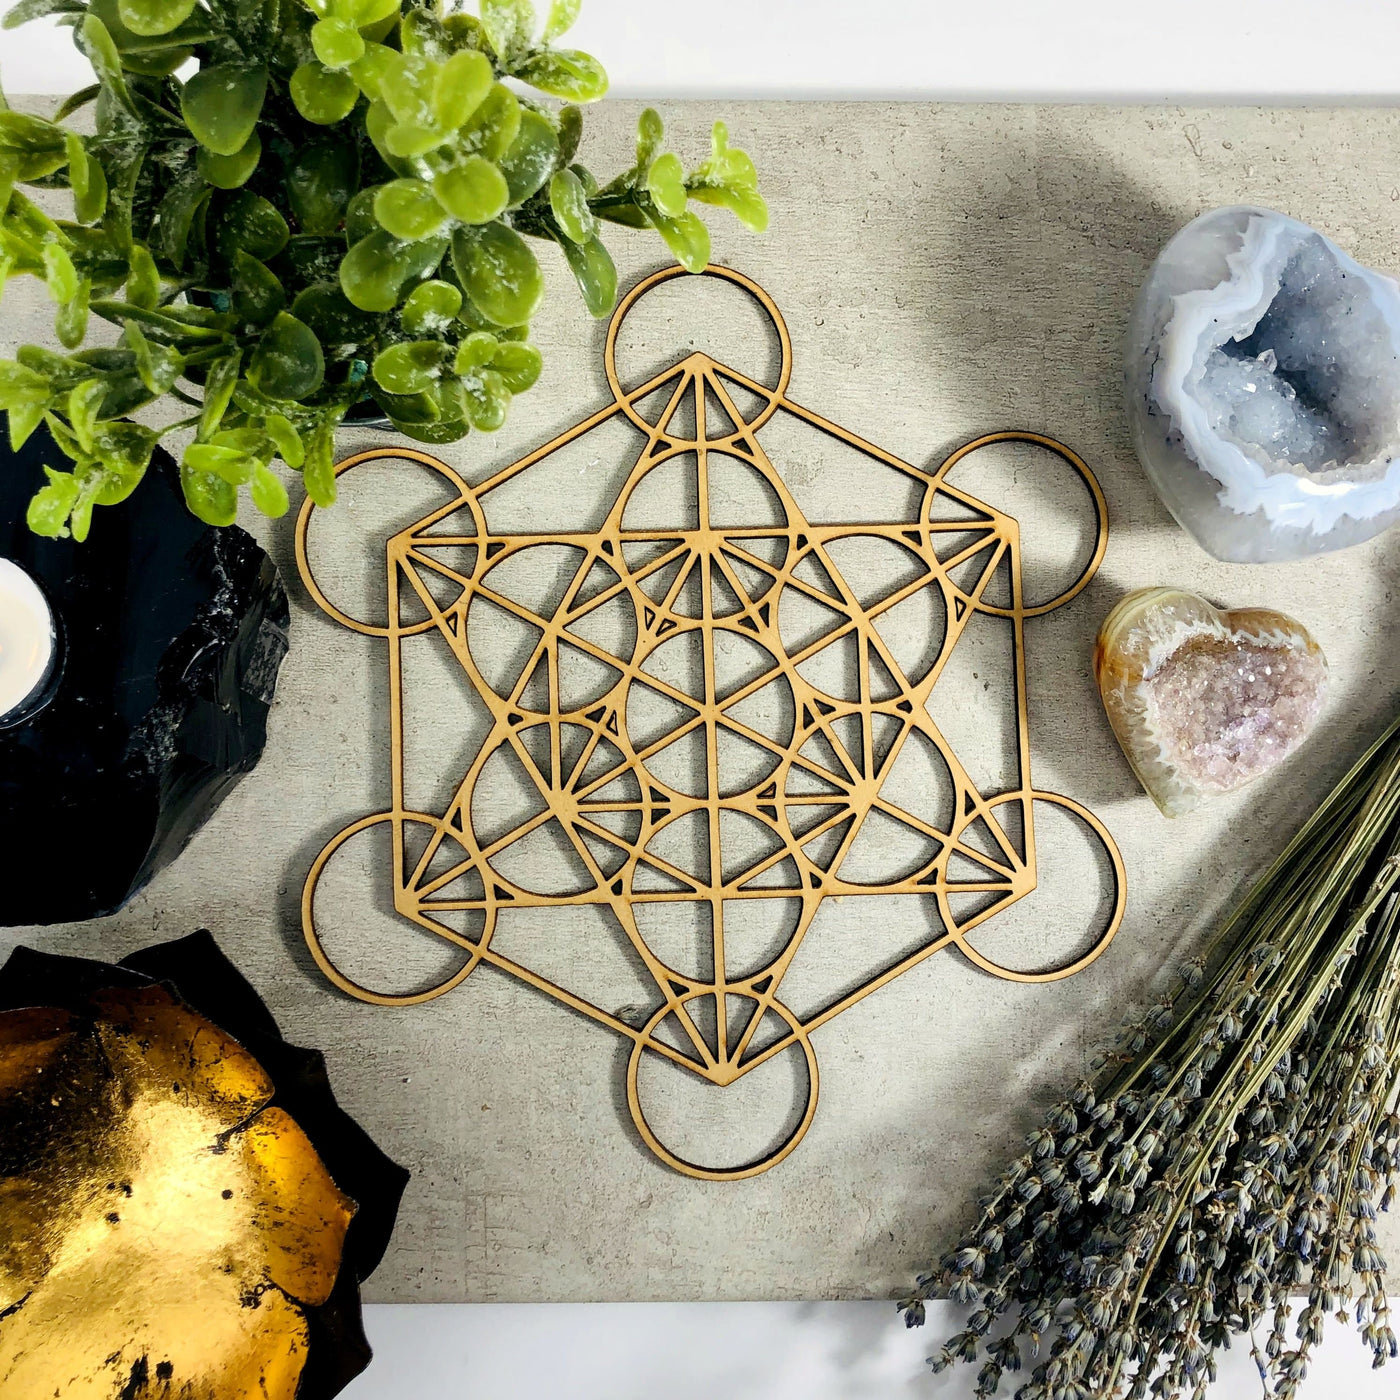 Metatron's Cube Wooden Grid displayed on grey background